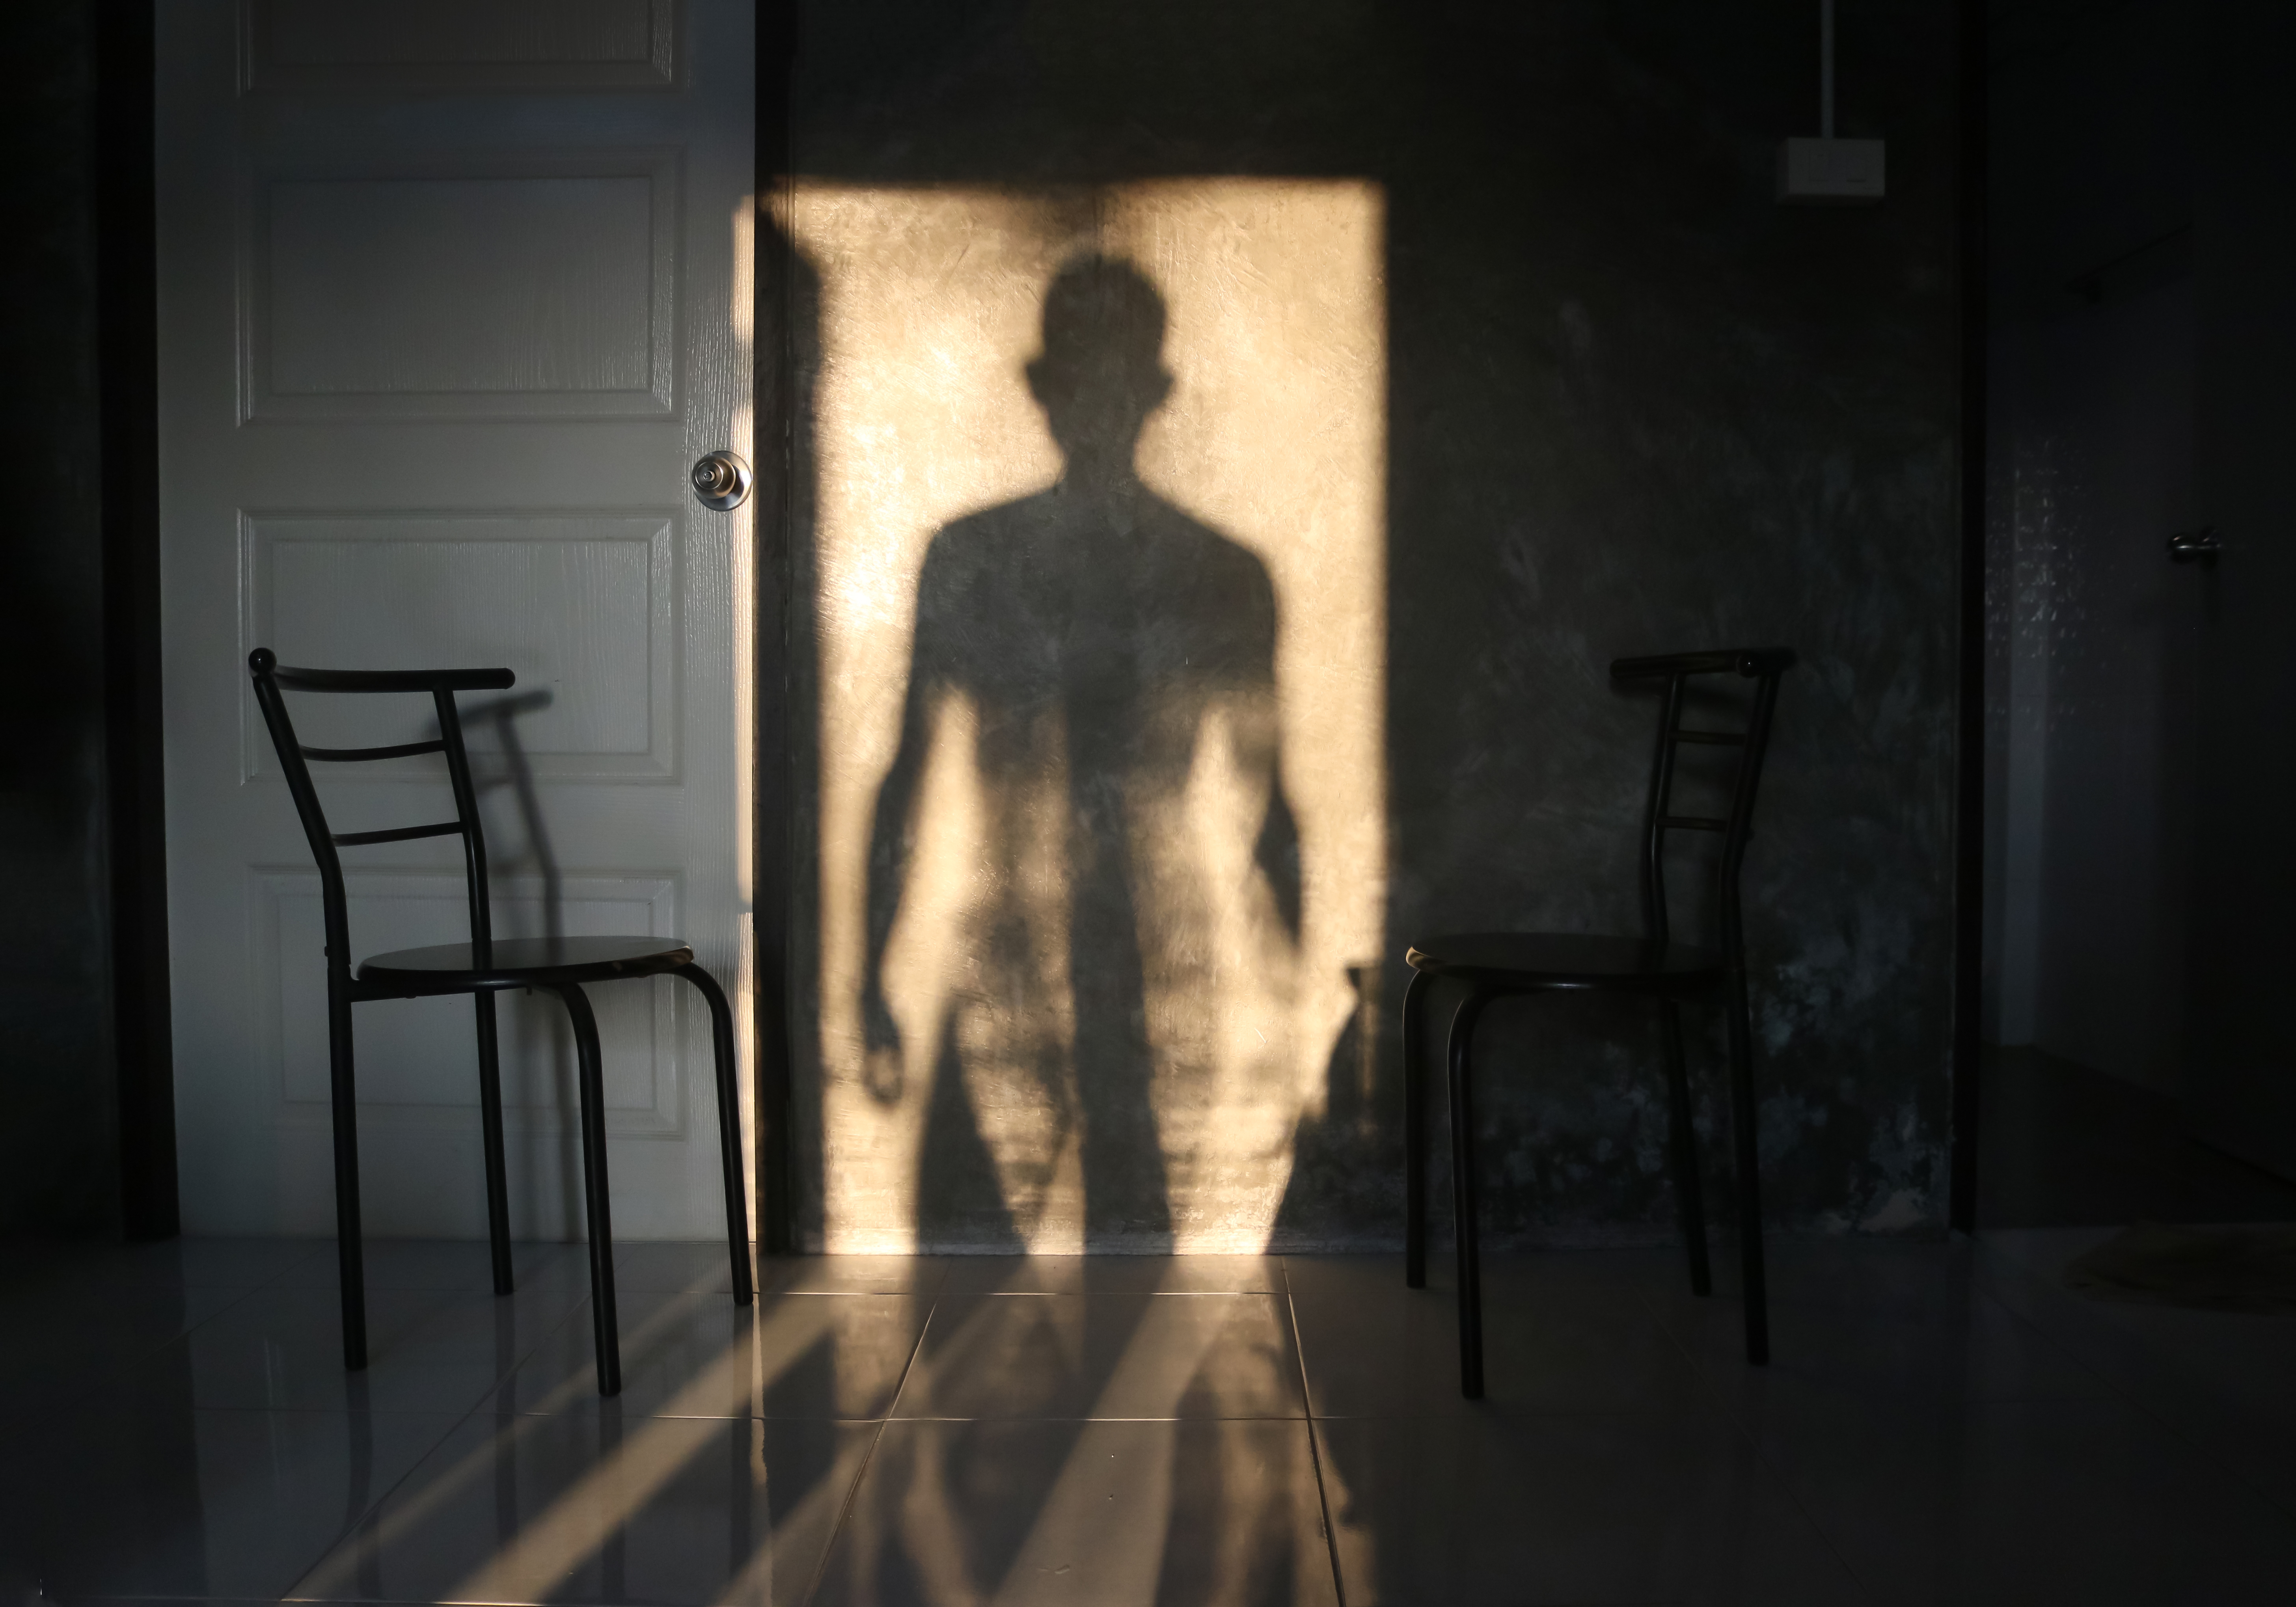 The man's shadow stood in the door on the wall | Source: Shutterstock.com